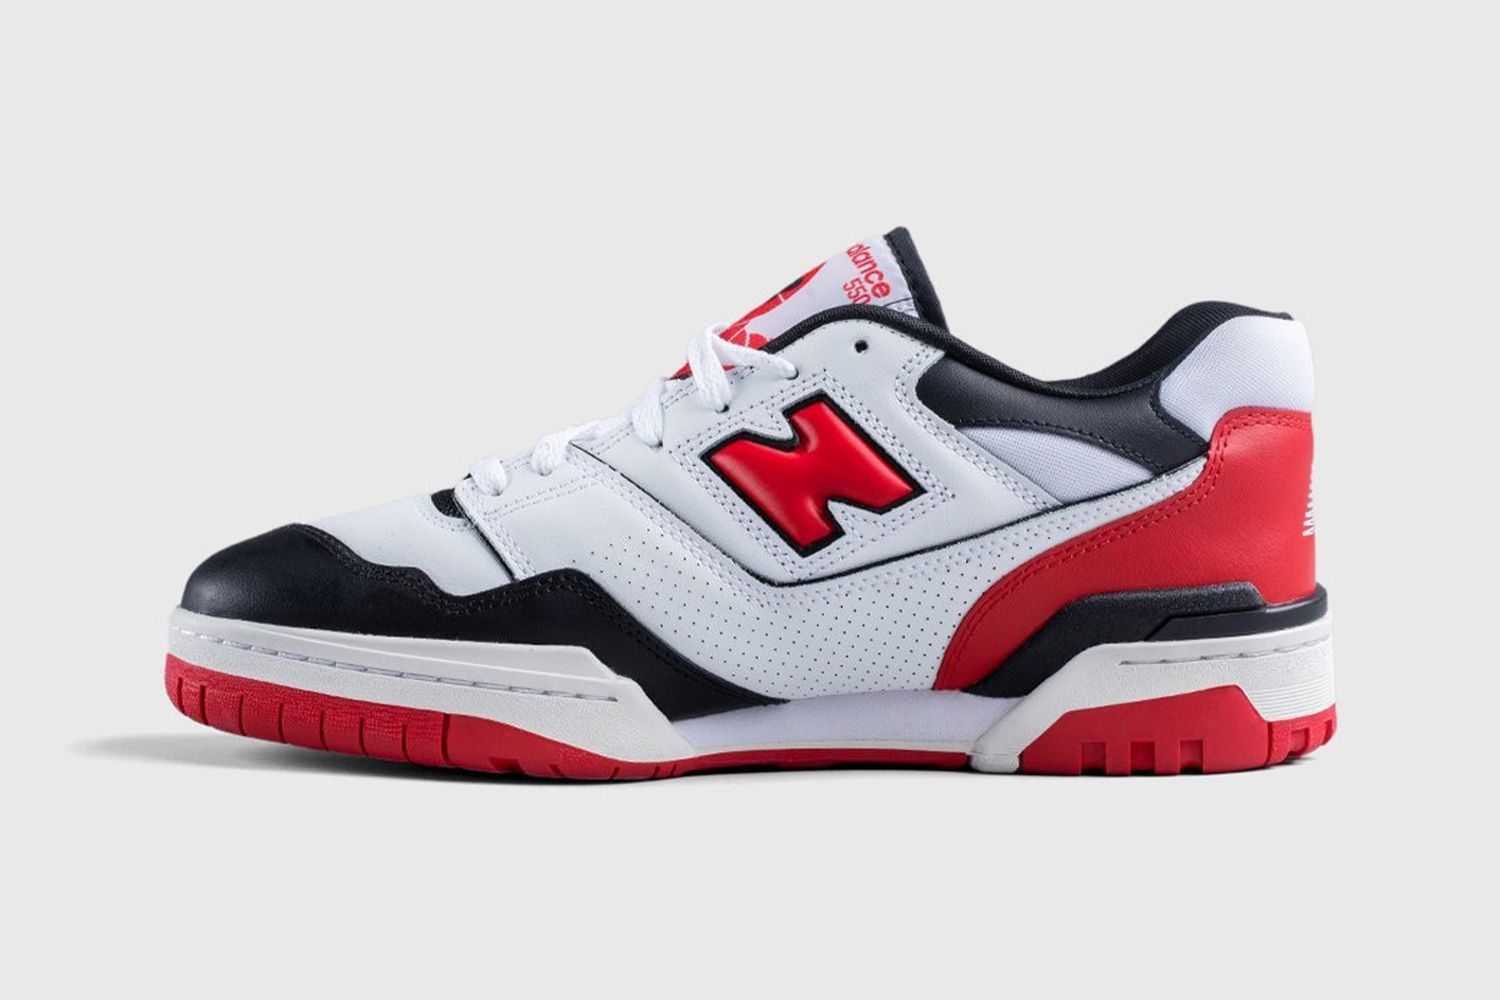 Todd Snyder x New Balance 992 10th Anniversary: Release Info